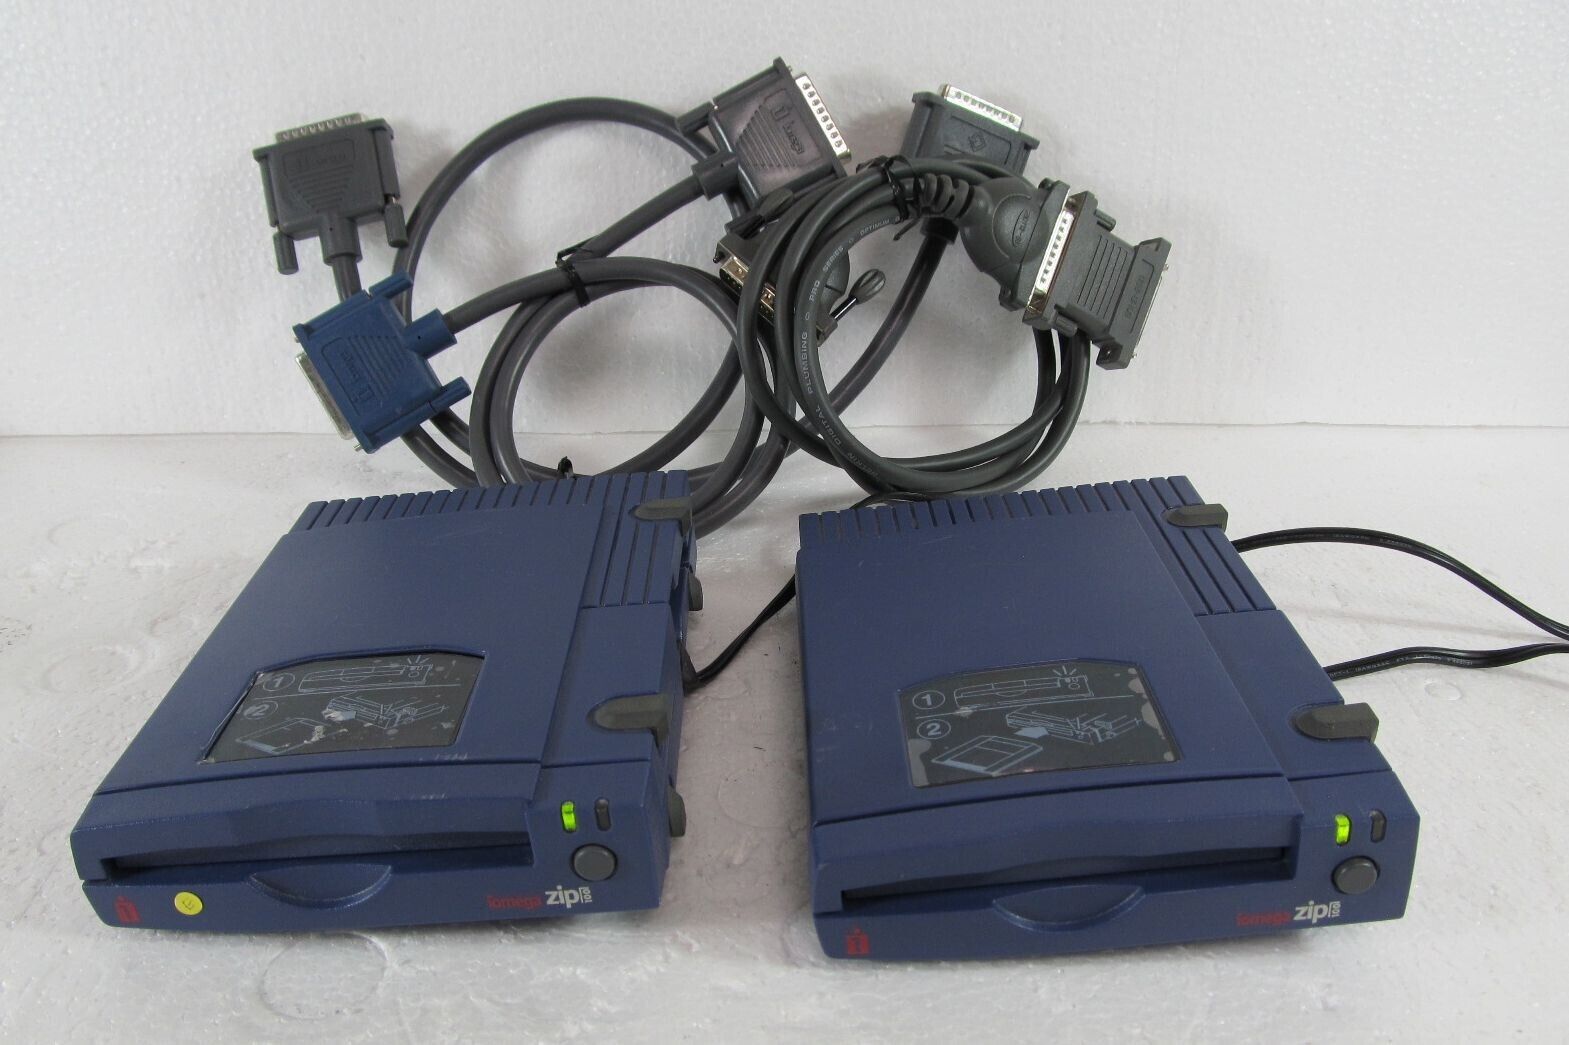 Lot of 2 - Iomega 100MB Zip Drives w/ Power Adapters & Cables - UNTESTED